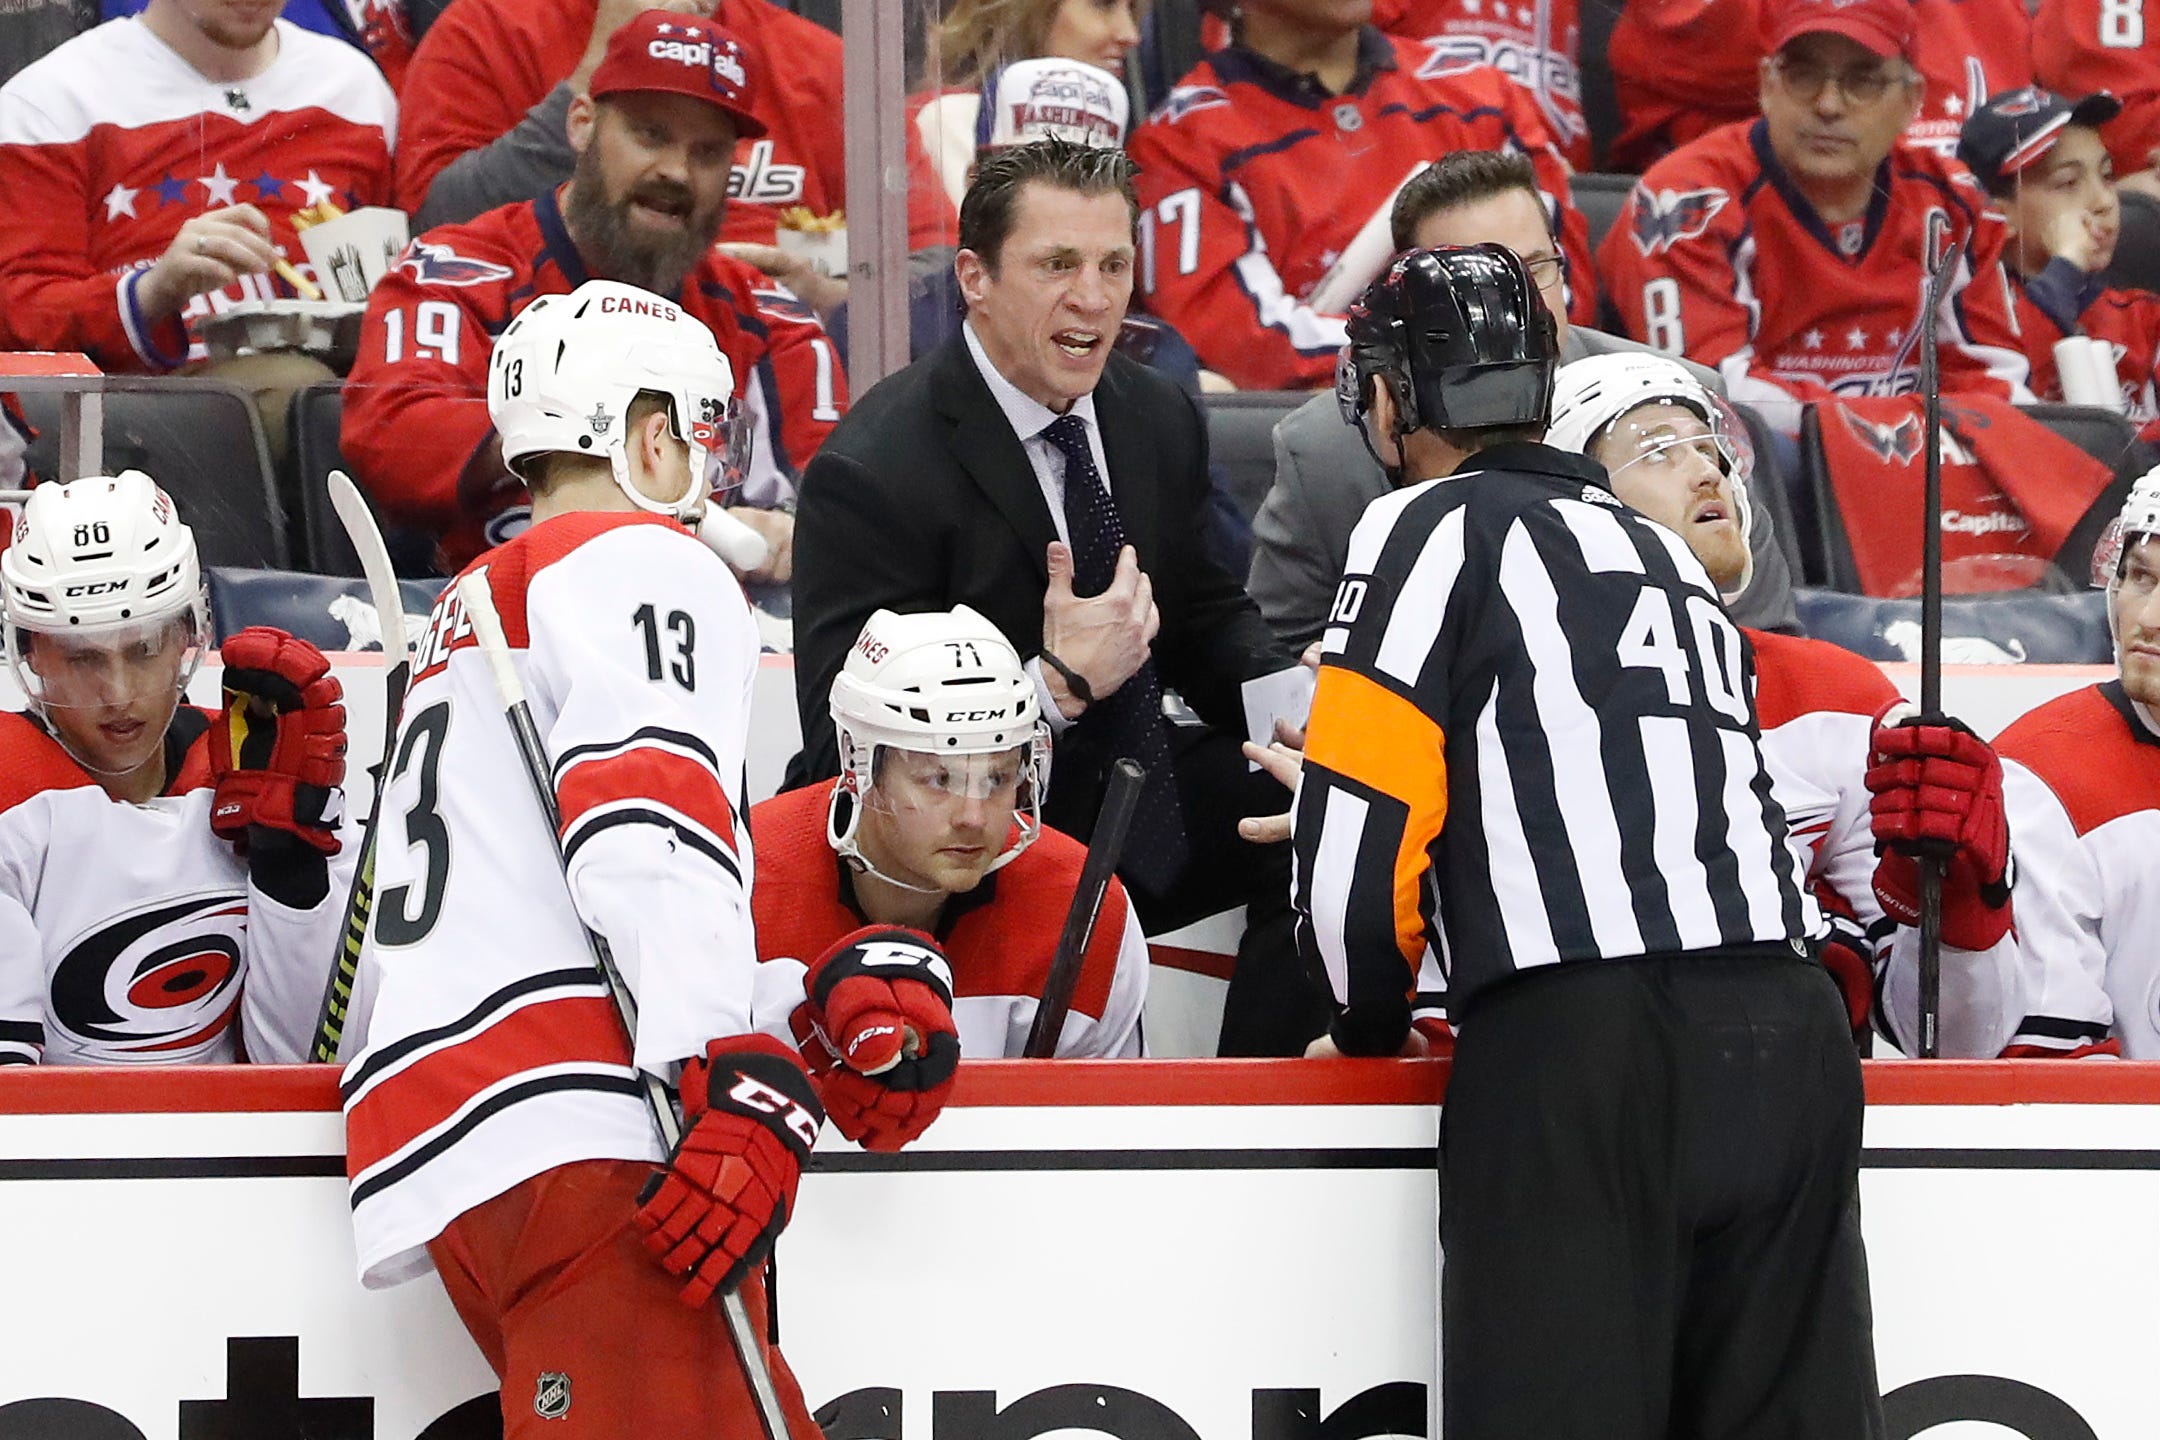 Carolina Hurricanes coach Rod Brind’Amour rips officials during in-game television interview